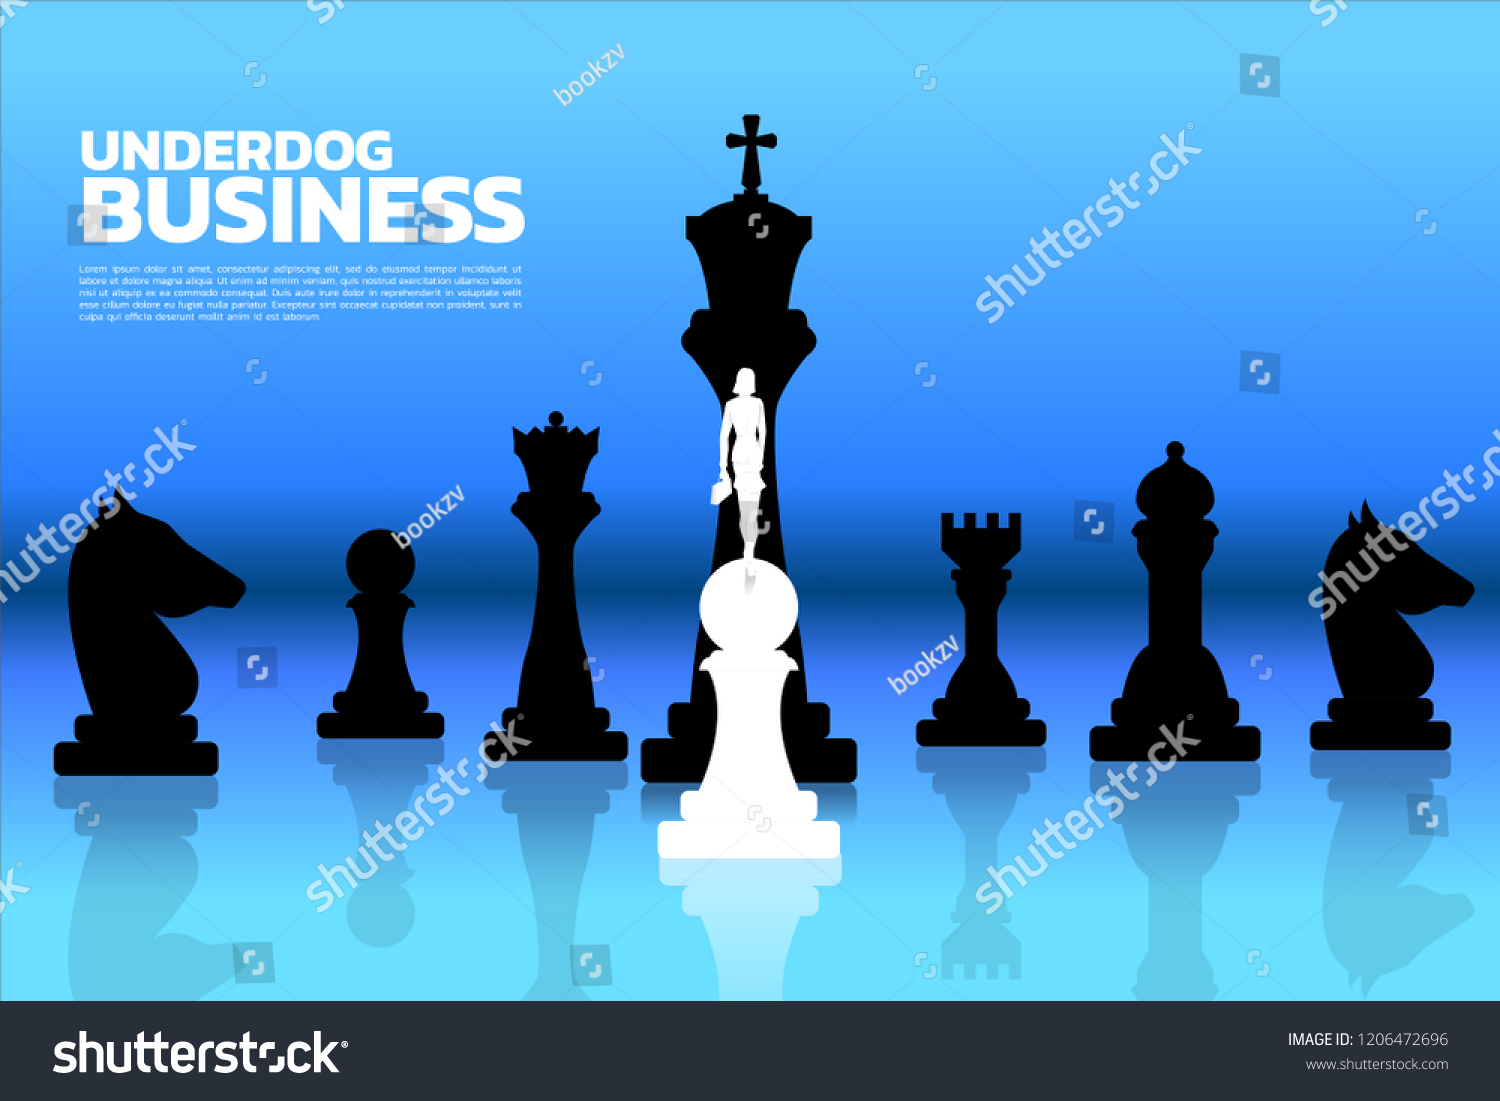 SVG of Silhouette of businesswomen standing on white pawn chess piece in front of all of black chess piece. Concept of underdog business marketing strategy. svg